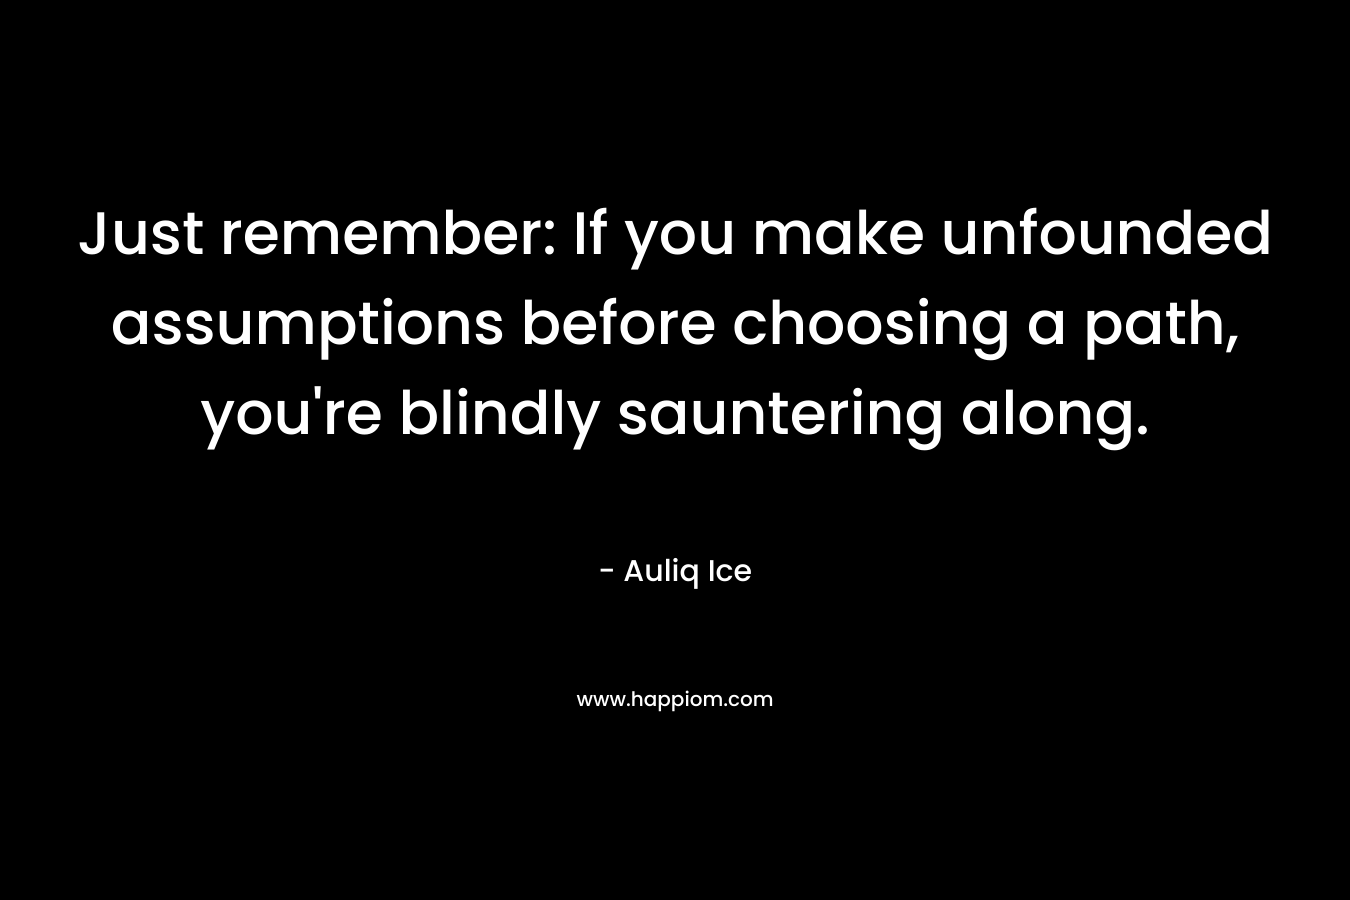 Just remember: If you make unfounded assumptions before choosing a path, you’re blindly sauntering along. – Auliq Ice